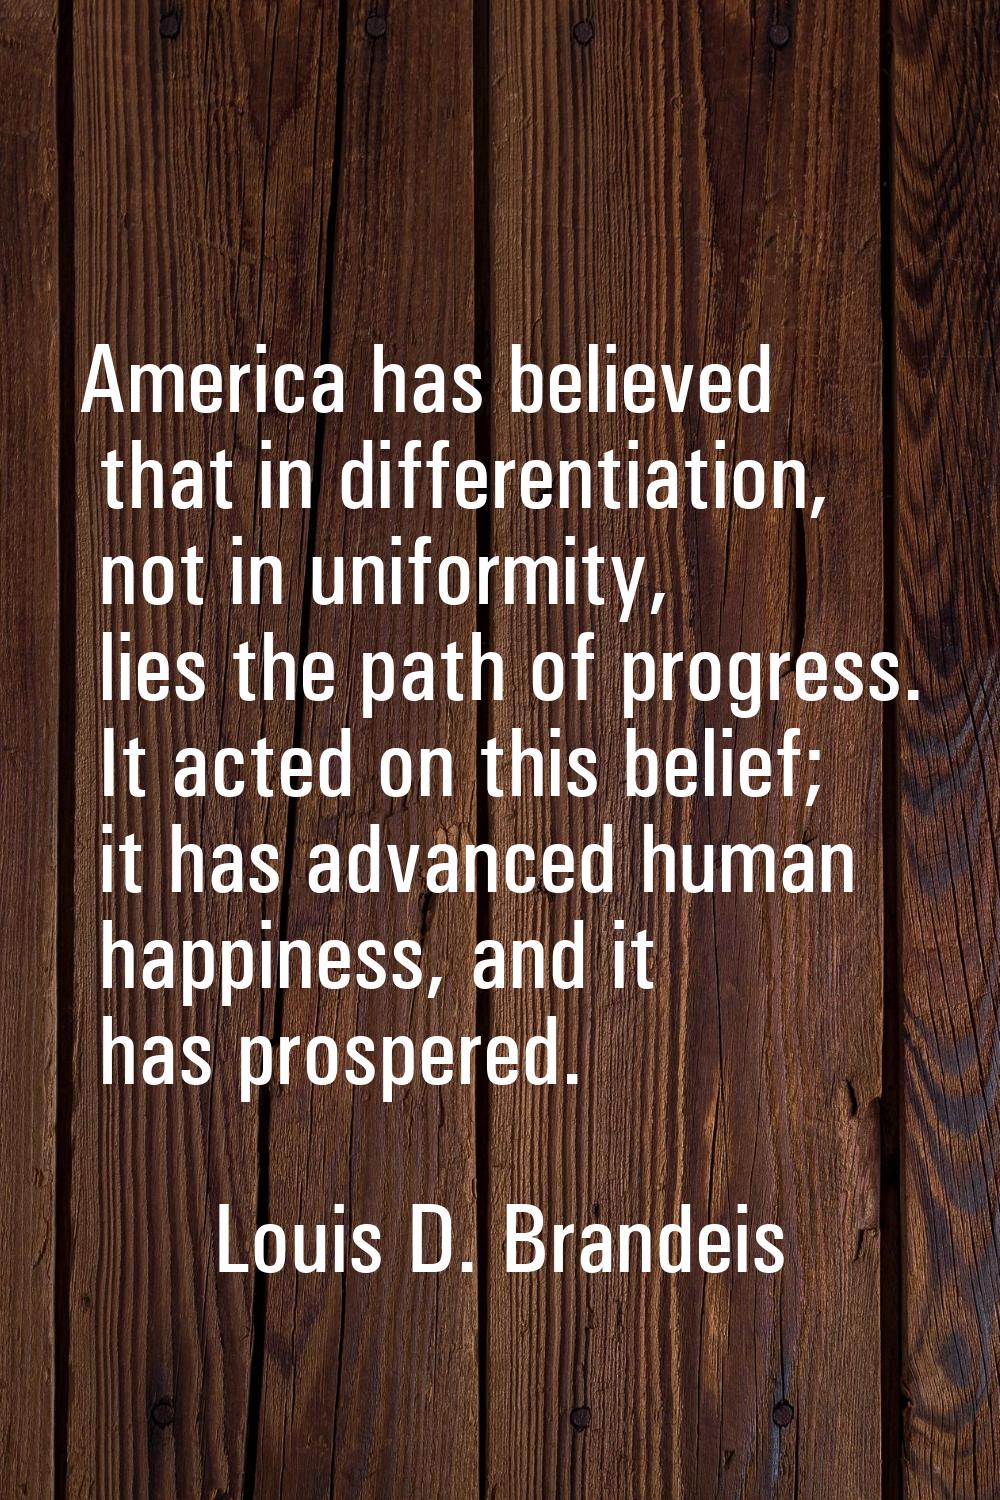 America has believed that in differentiation, not in uniformity, lies the path of progress. It acte